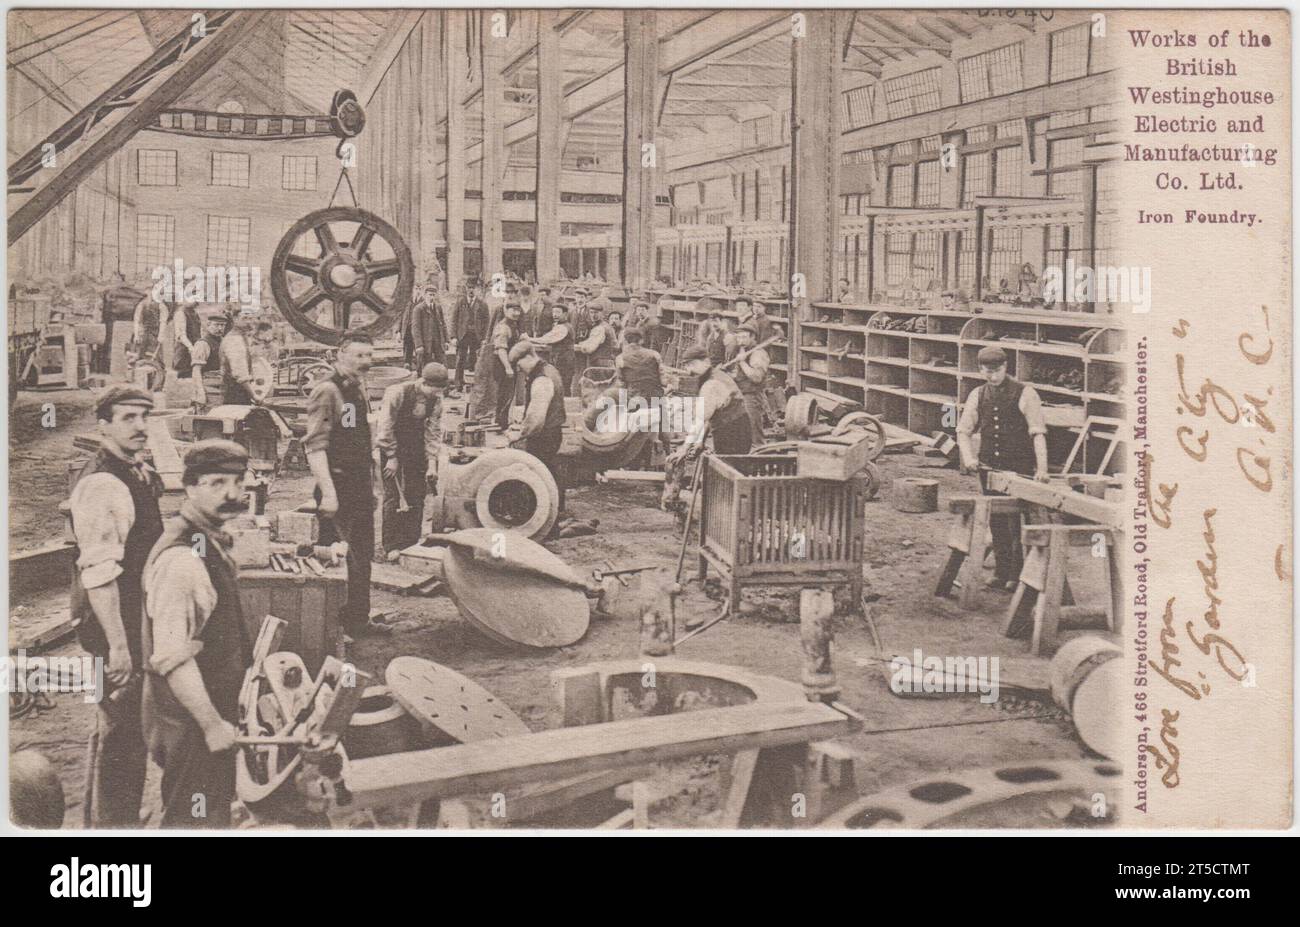 Works of the British Westinghouse Electric and Manufacturing Co. Ltd., iron foundry, Old Trafford, Manchester, early 20th century Stock Photo